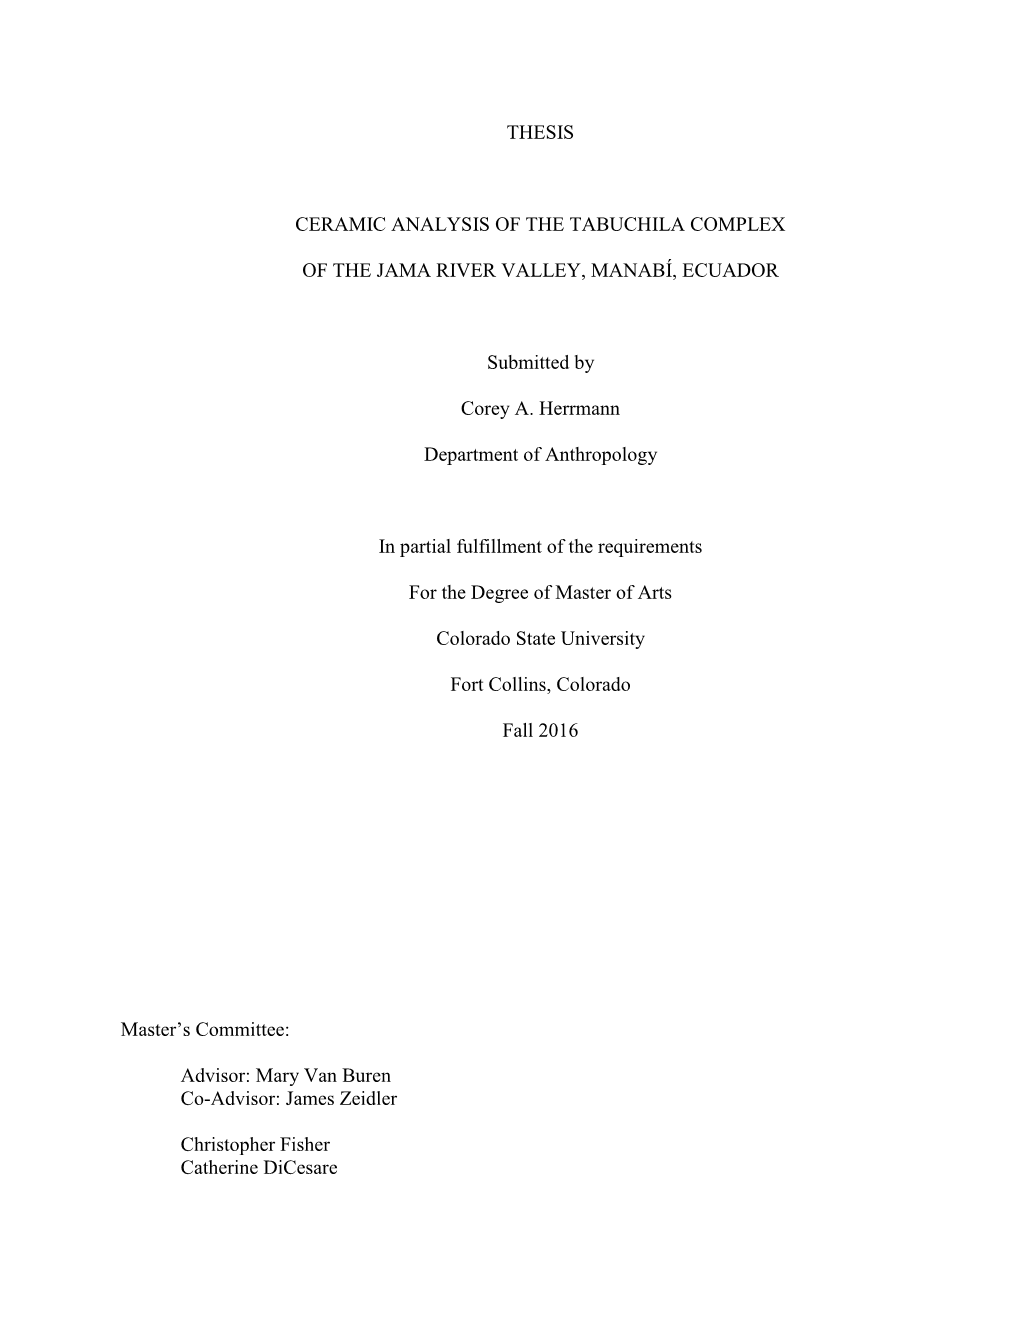 Thesis Ceramic Analysis of the Tabuchila Complex Of